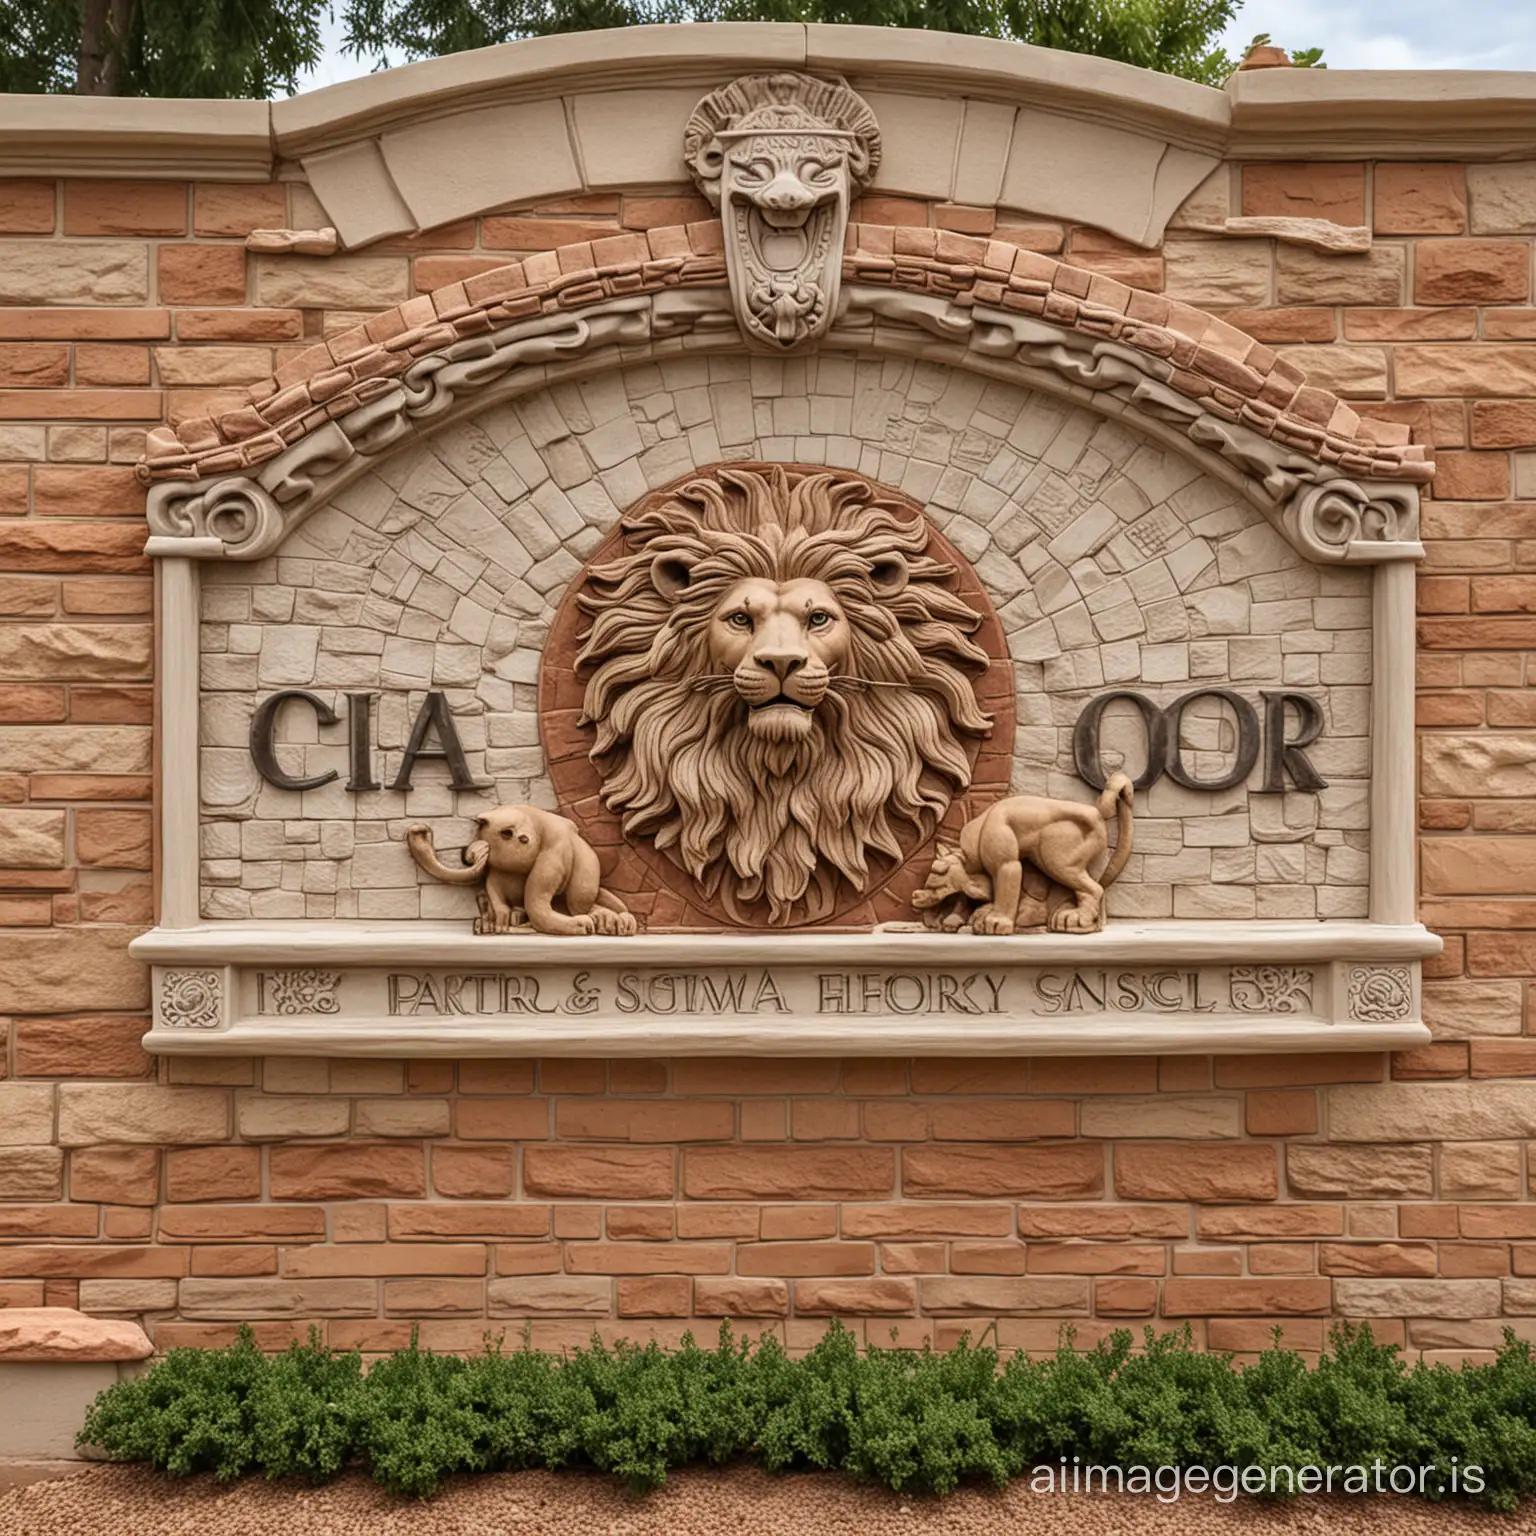 Neighborhood monument sign made of brick and stucco with Mediterranean style architecture incorporating lions, East, water, and the sun.